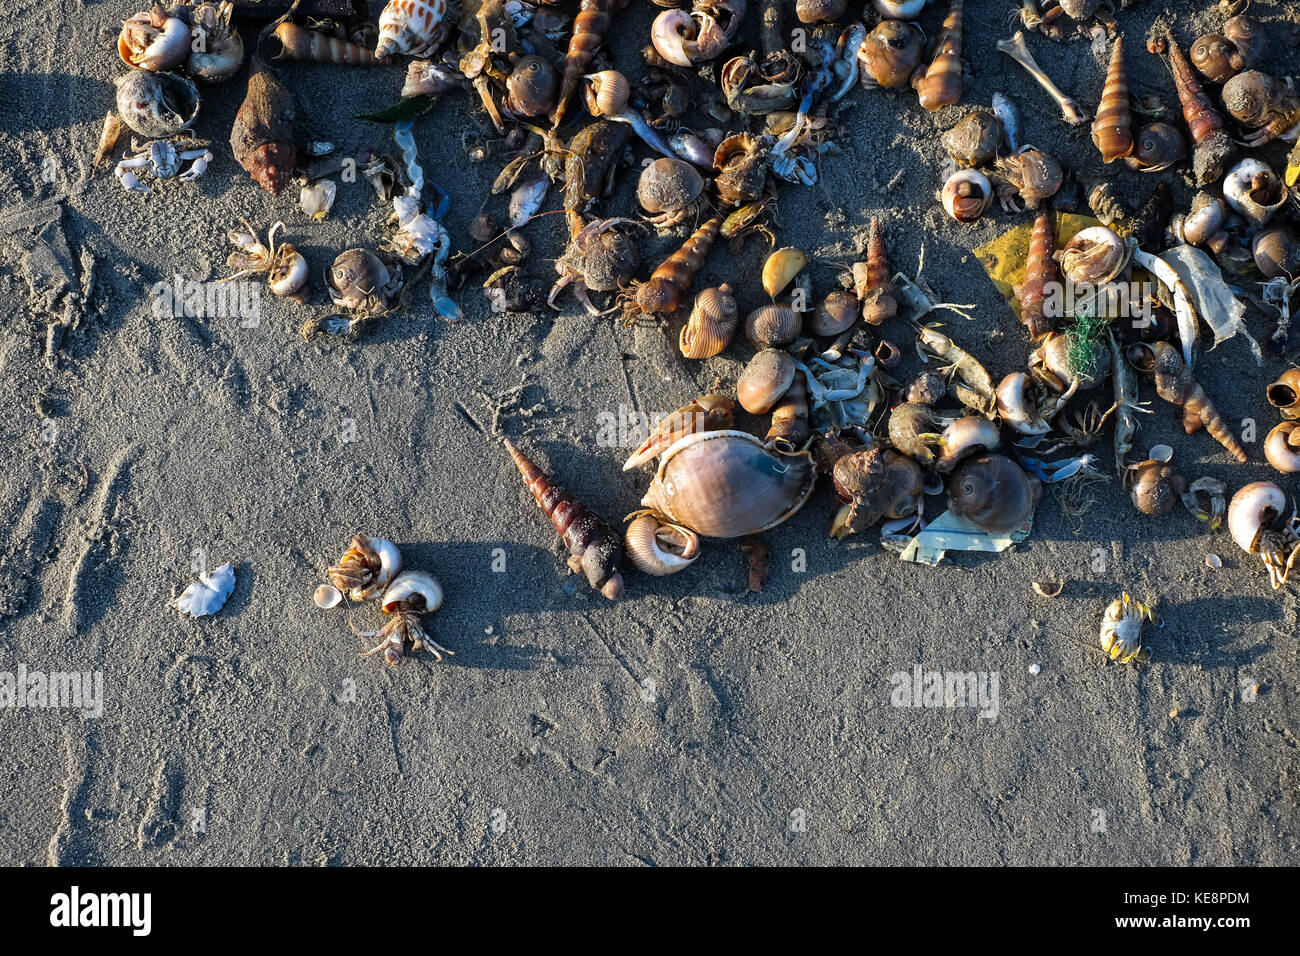 Snails, mussel drifted on the beach in sunny day Stock Photo